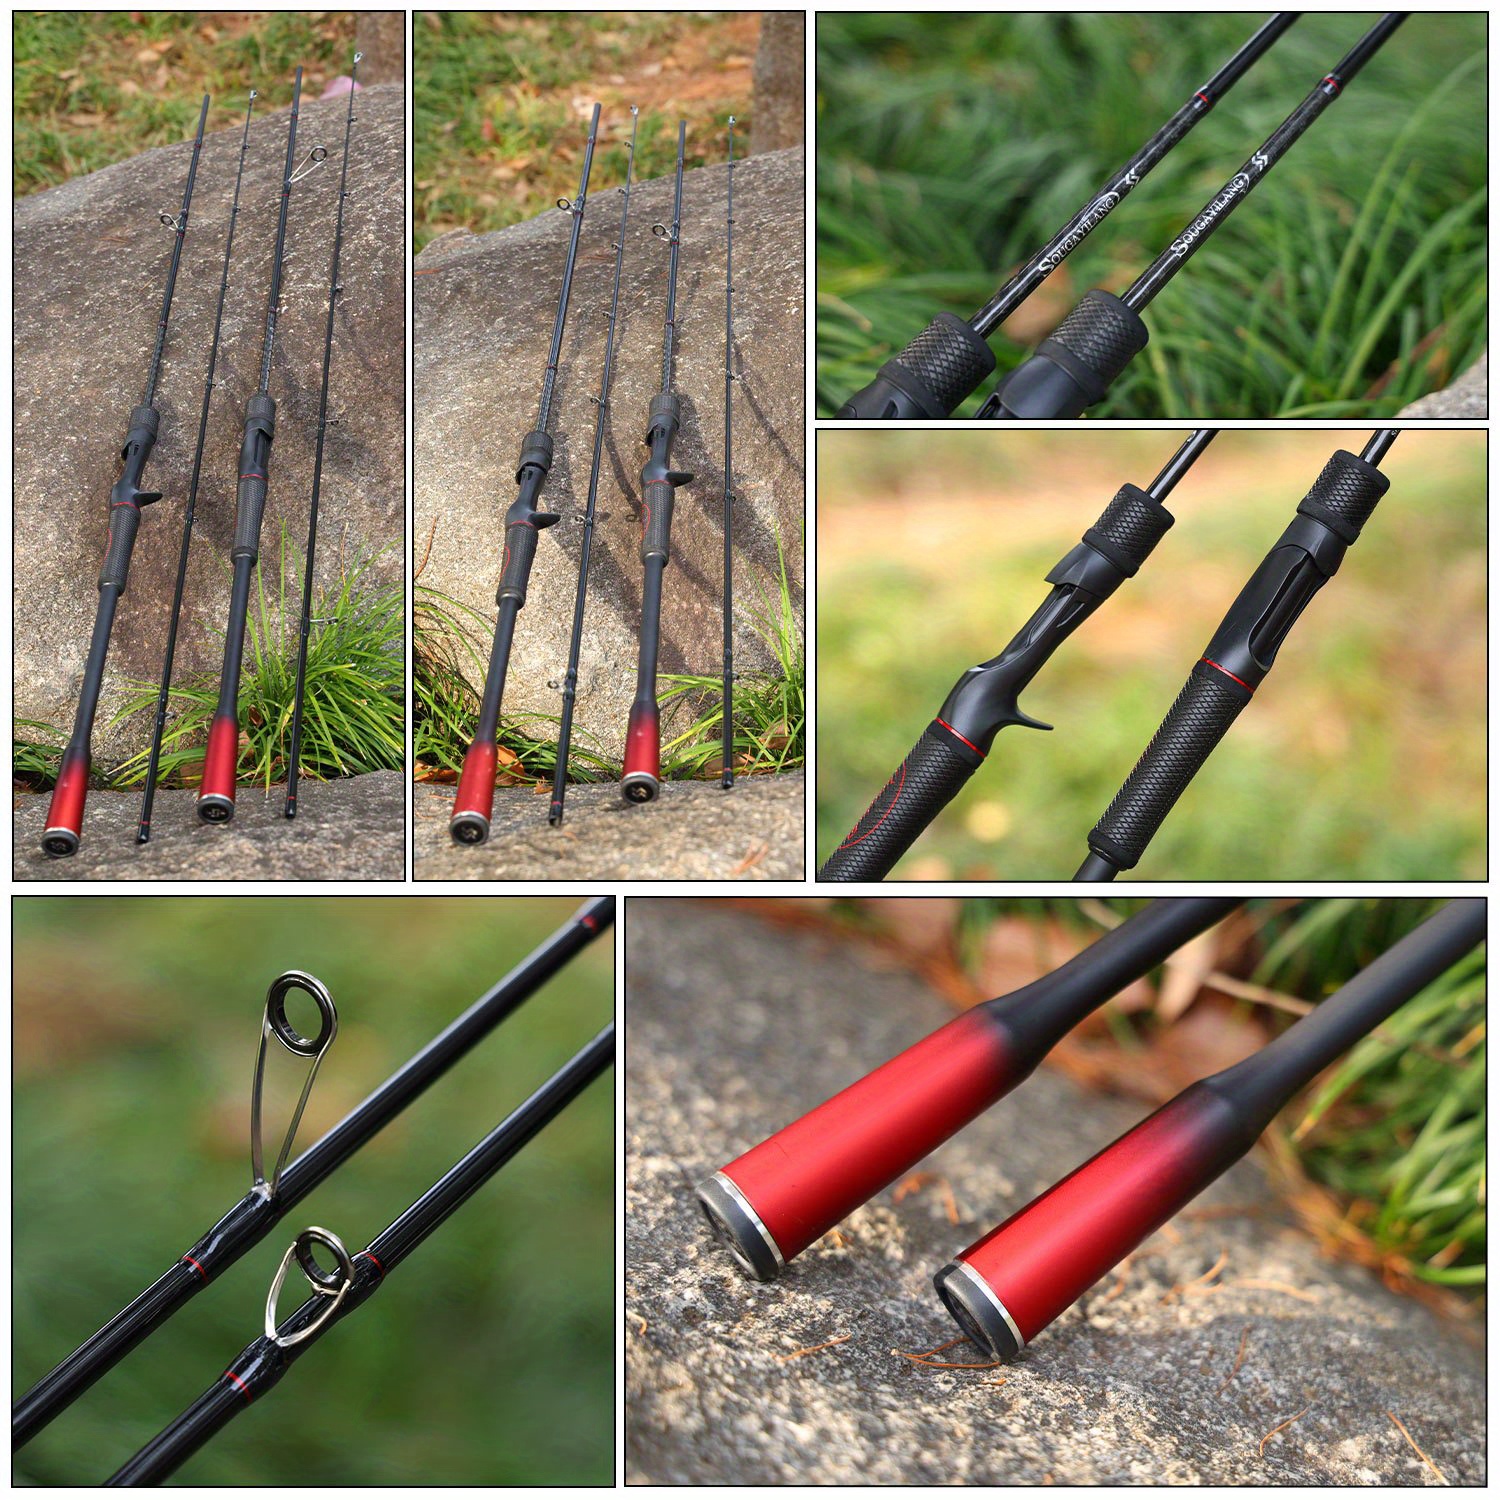 ONE BASS Fishing Pole, 24 Ton Carbon Fibre Casting & Spinning Rods